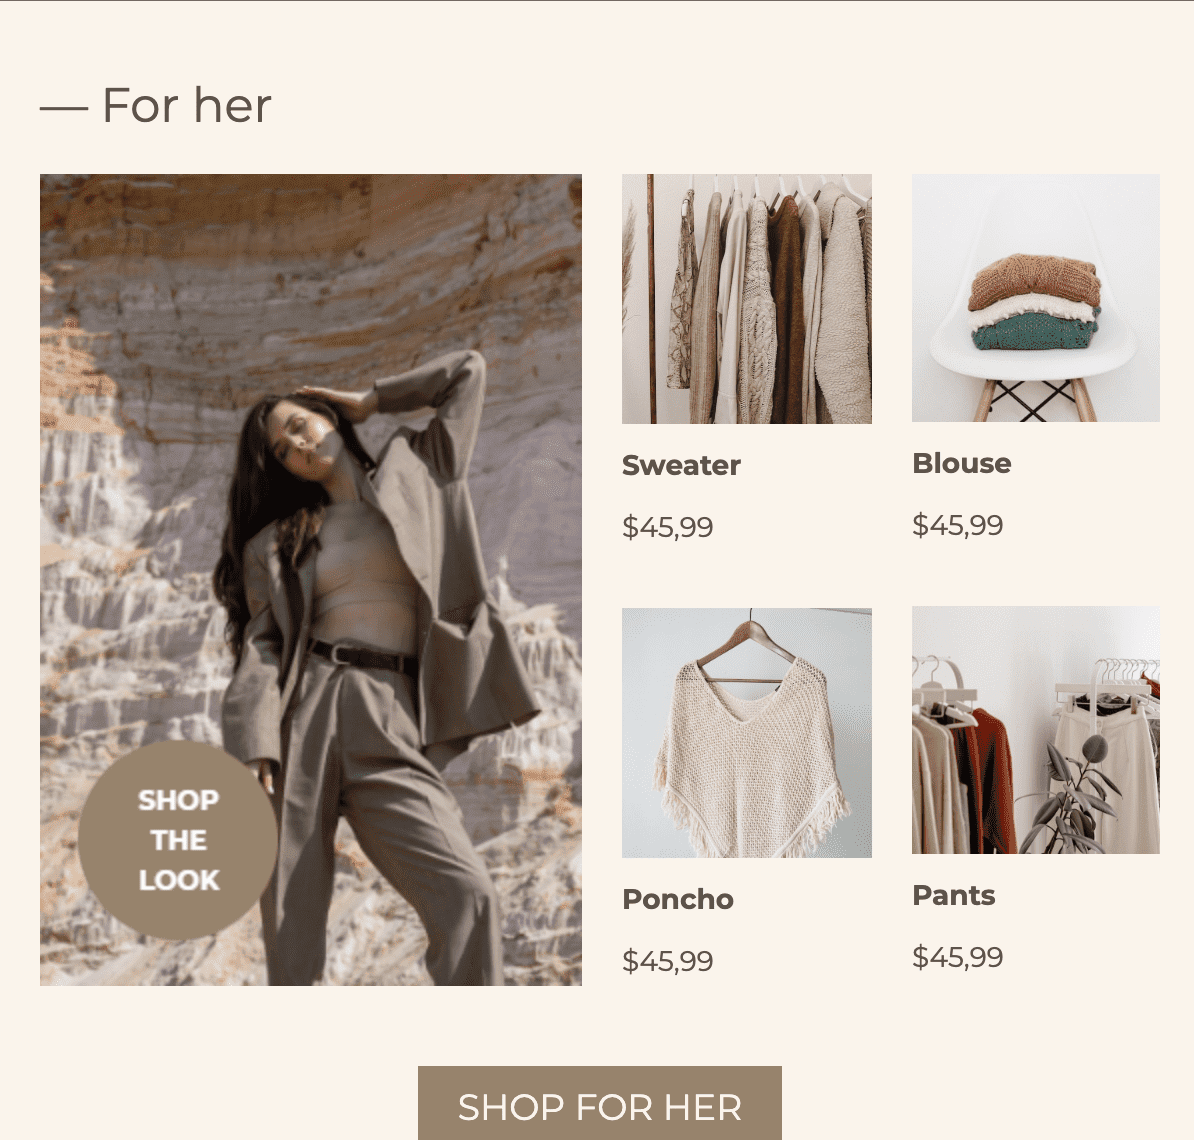 Promotional email templates for the fashion industry